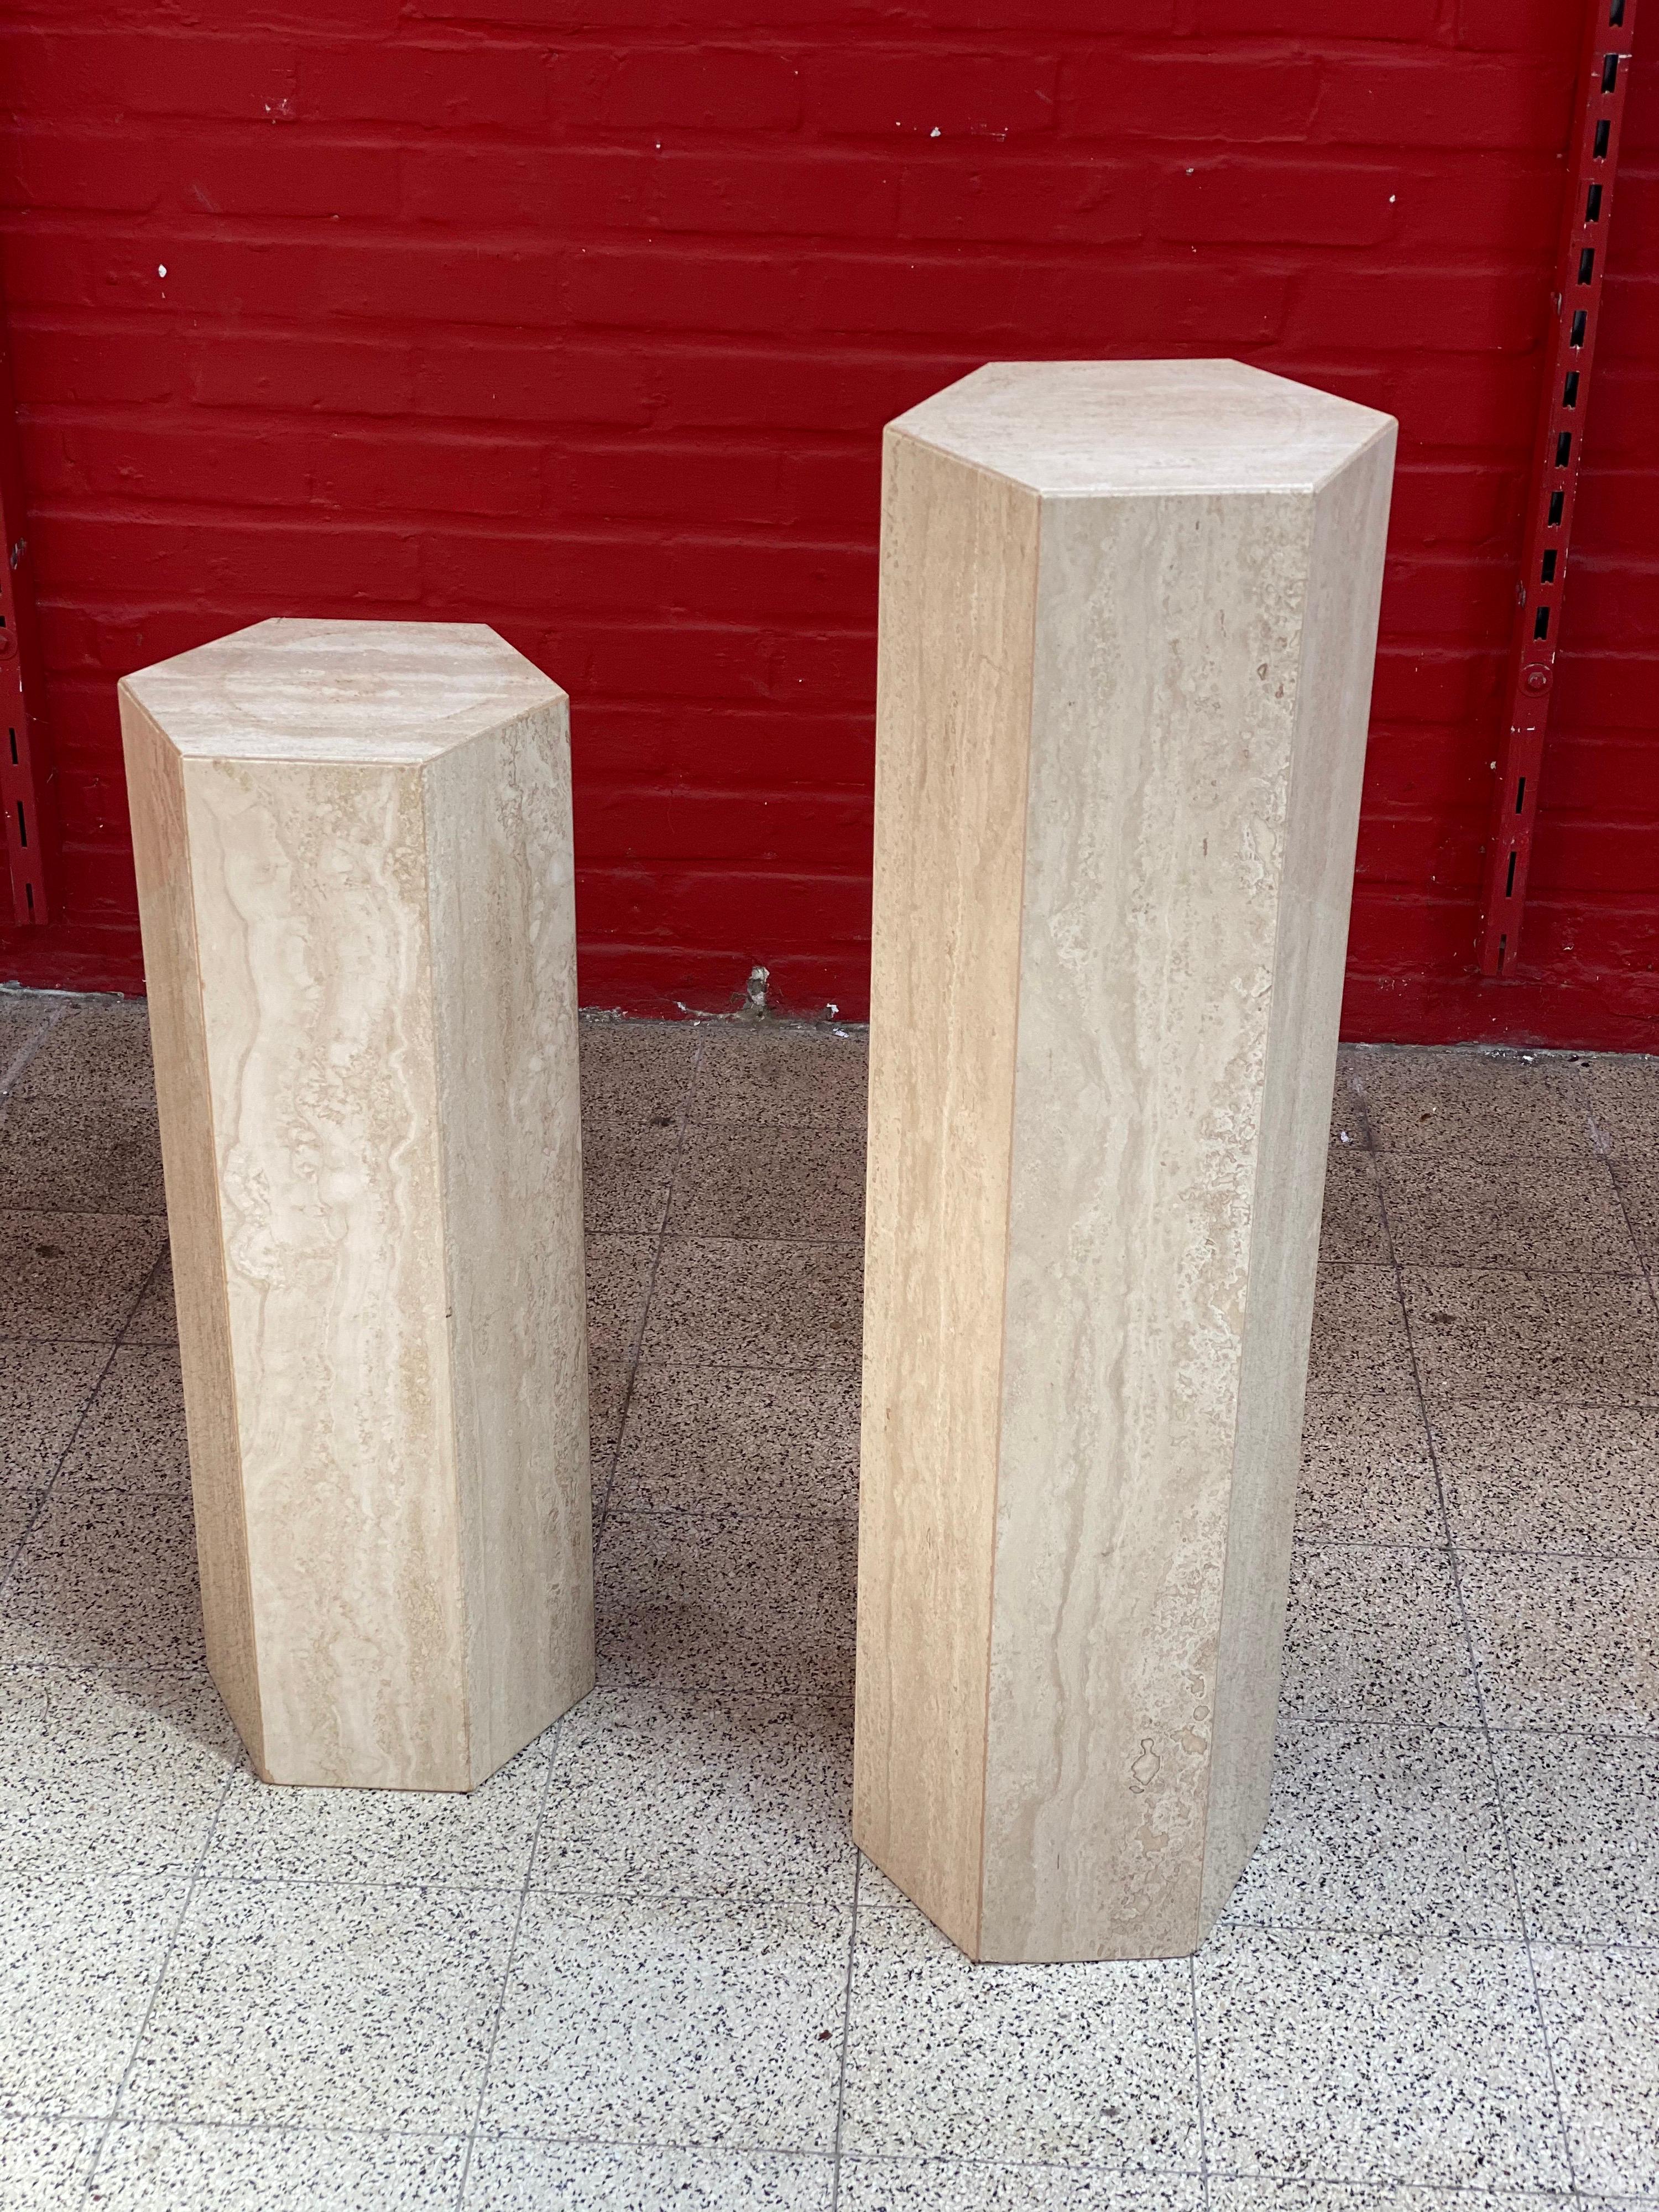 2 travertine pedestals circa 1960

Measures: 90 x 23 x 26 cm
70 x 23 x 26 cm
The price is for one.